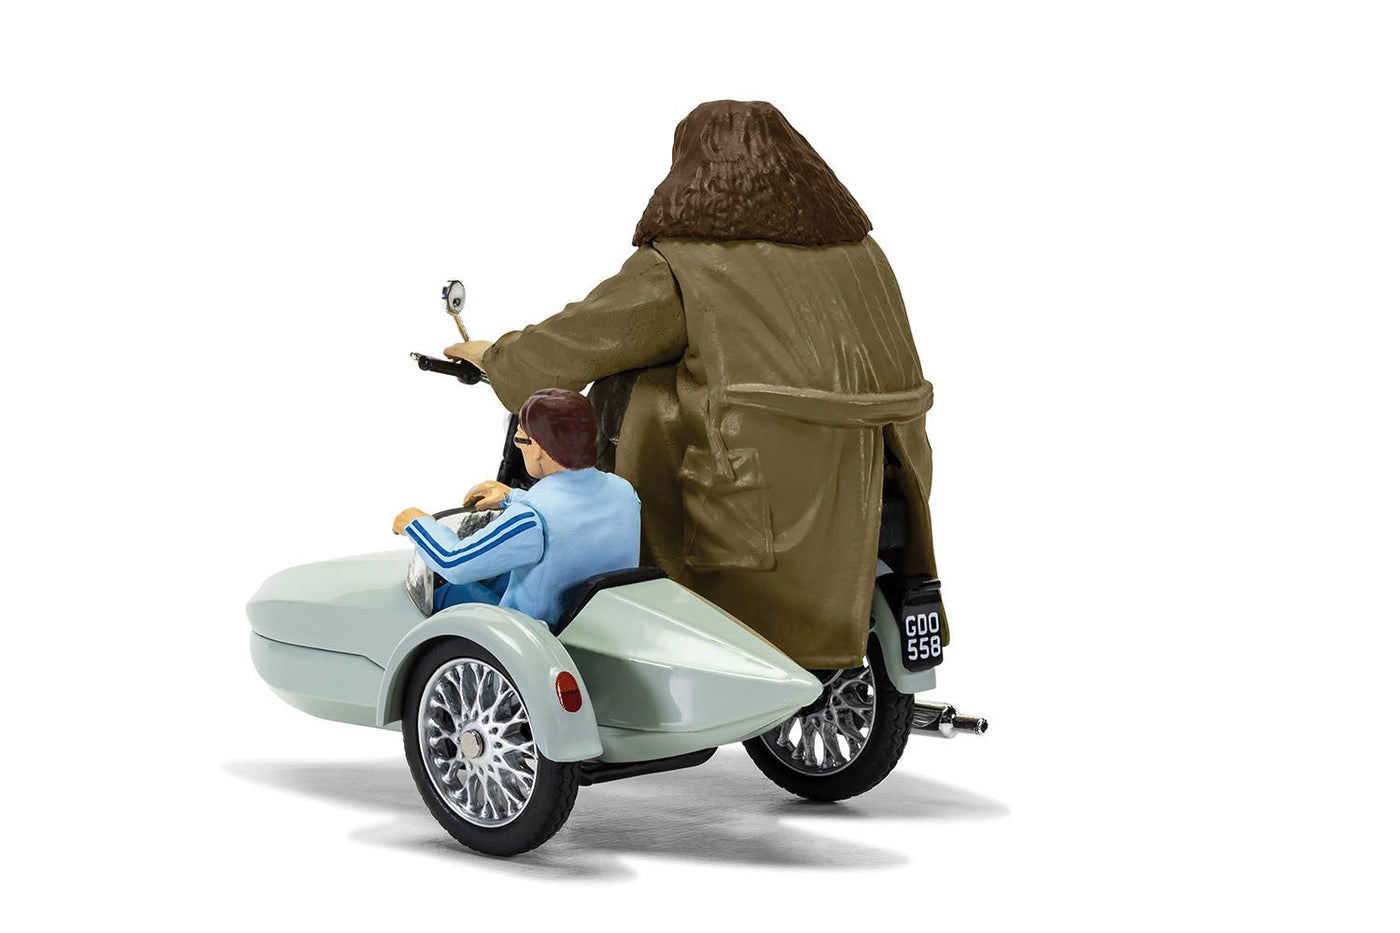 Harry Potter  Hagrids Motorcycle and Sidecar